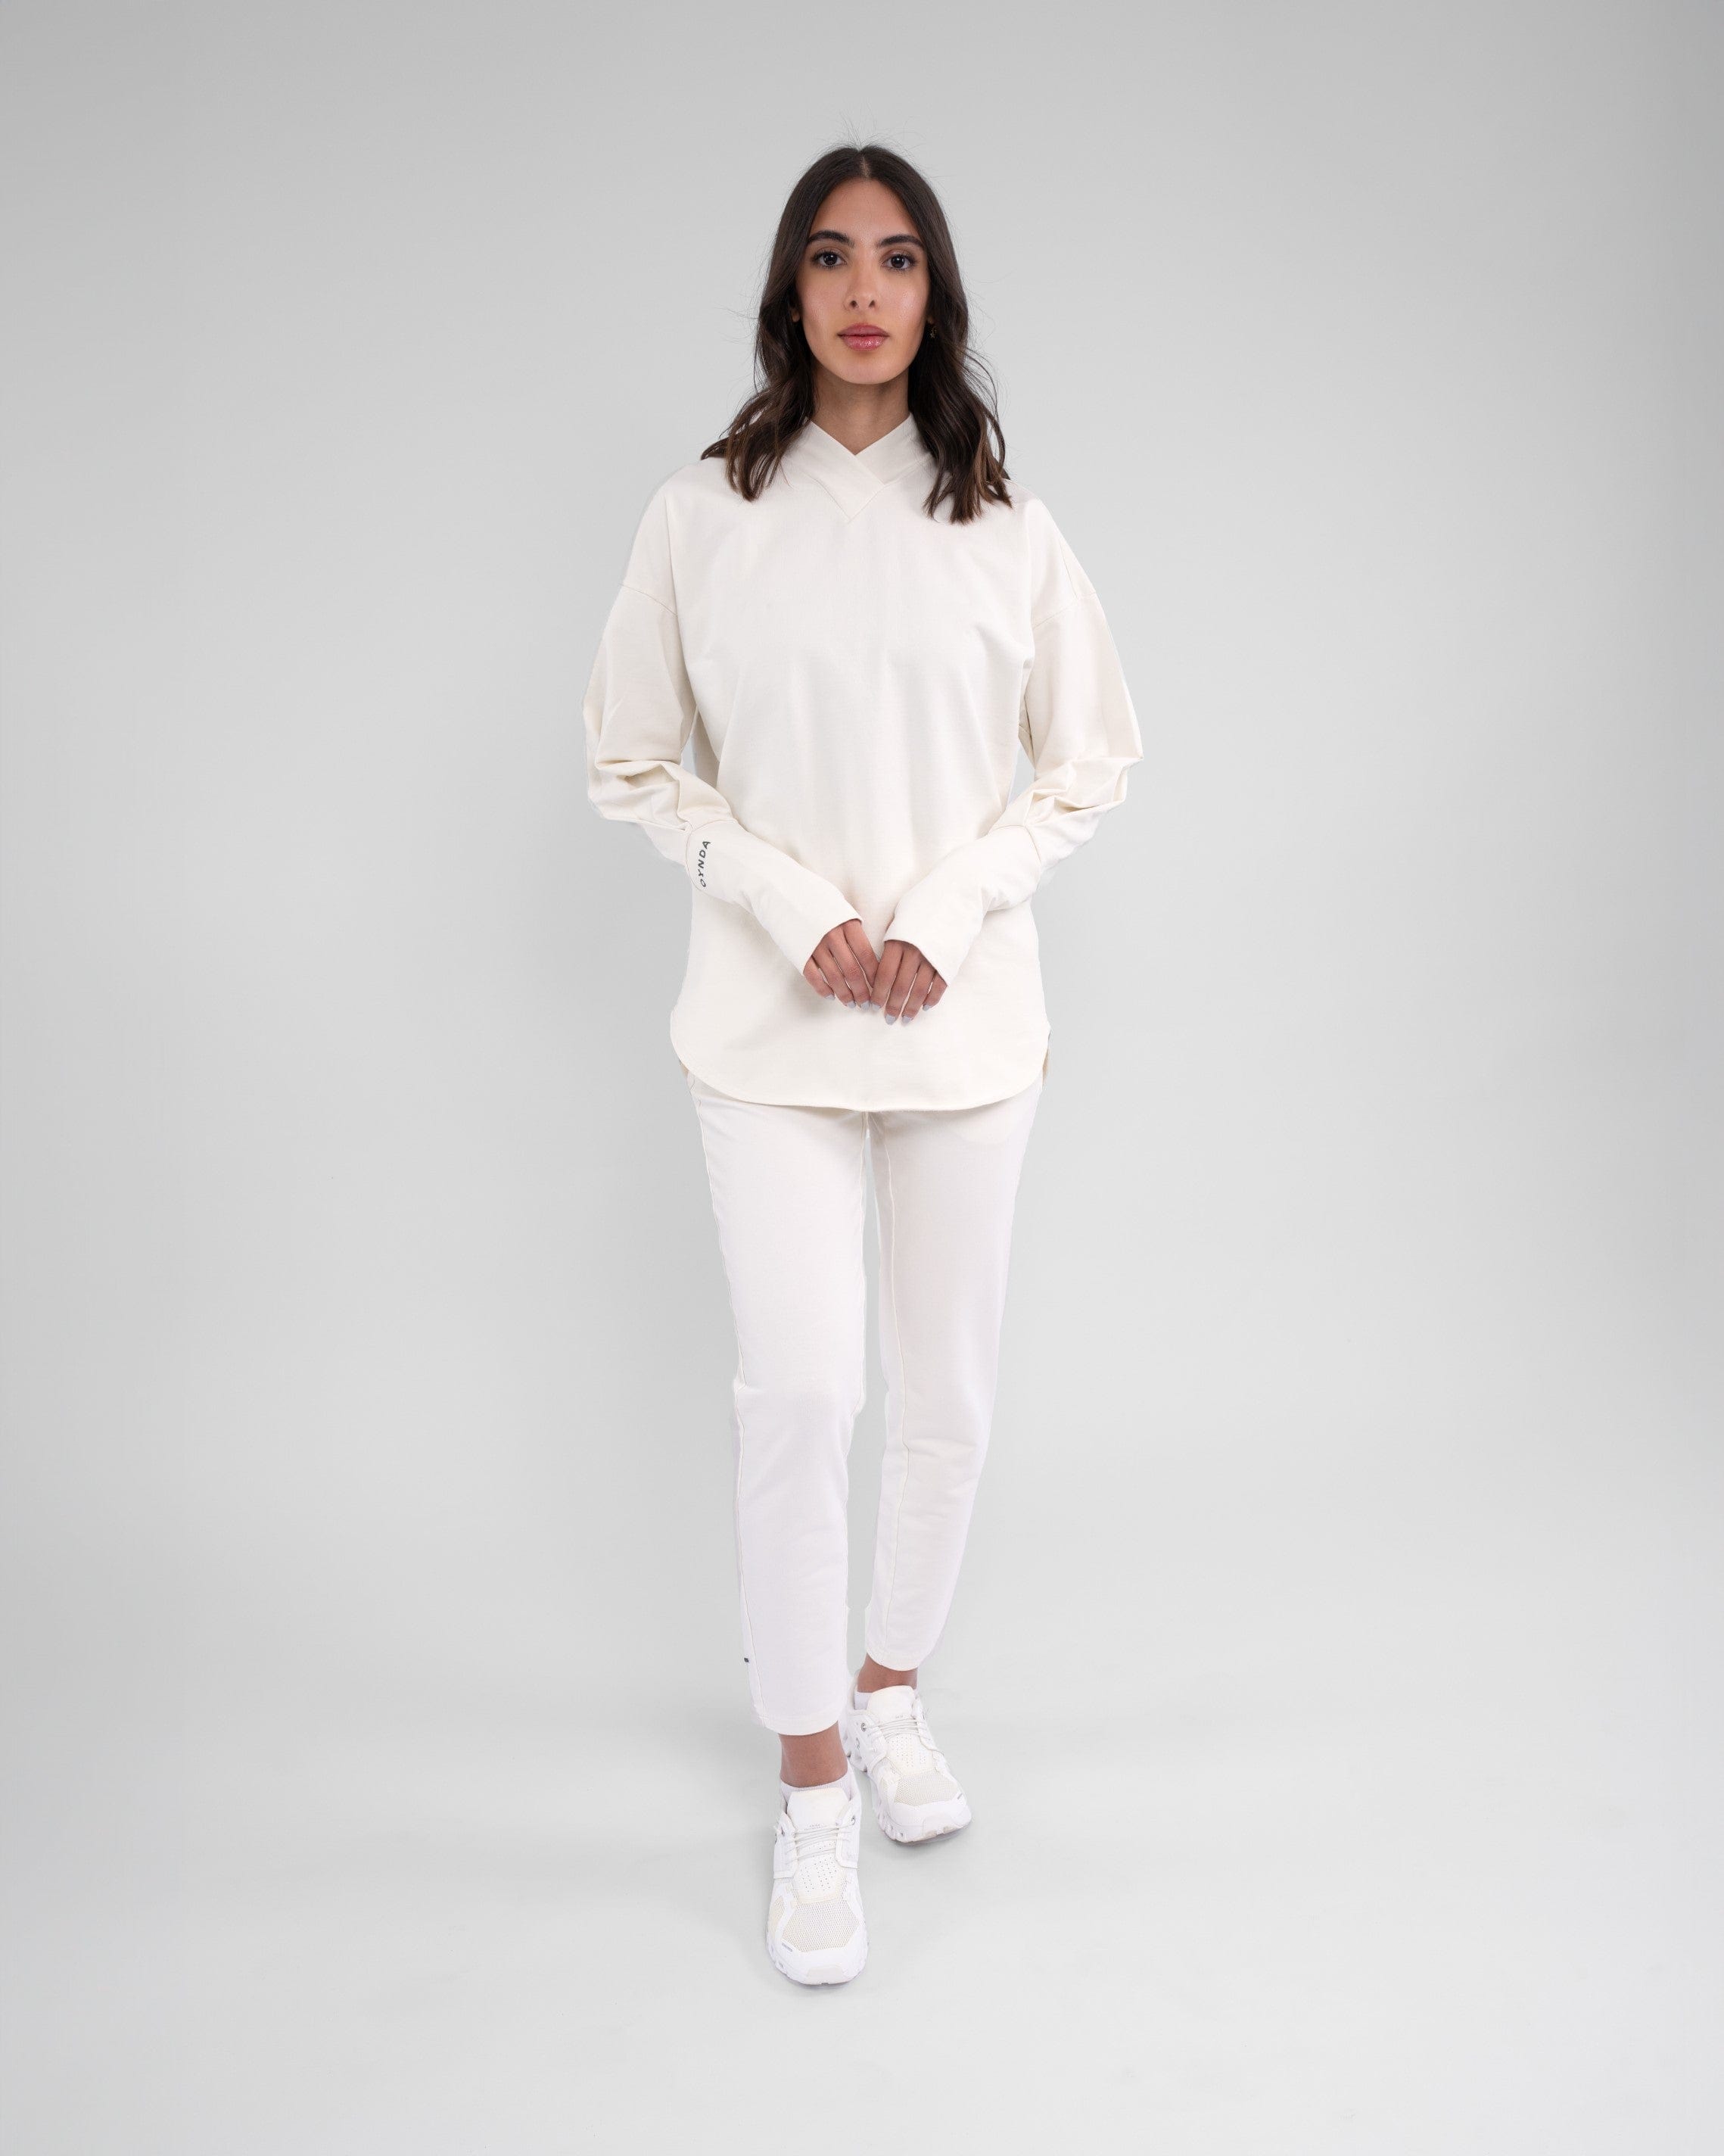 A woman stands confidently modeling modest CANTARA PANTS, Off White color made from moisture-wicking cotton terry loop fabric, complemented by a pair of white shoes.